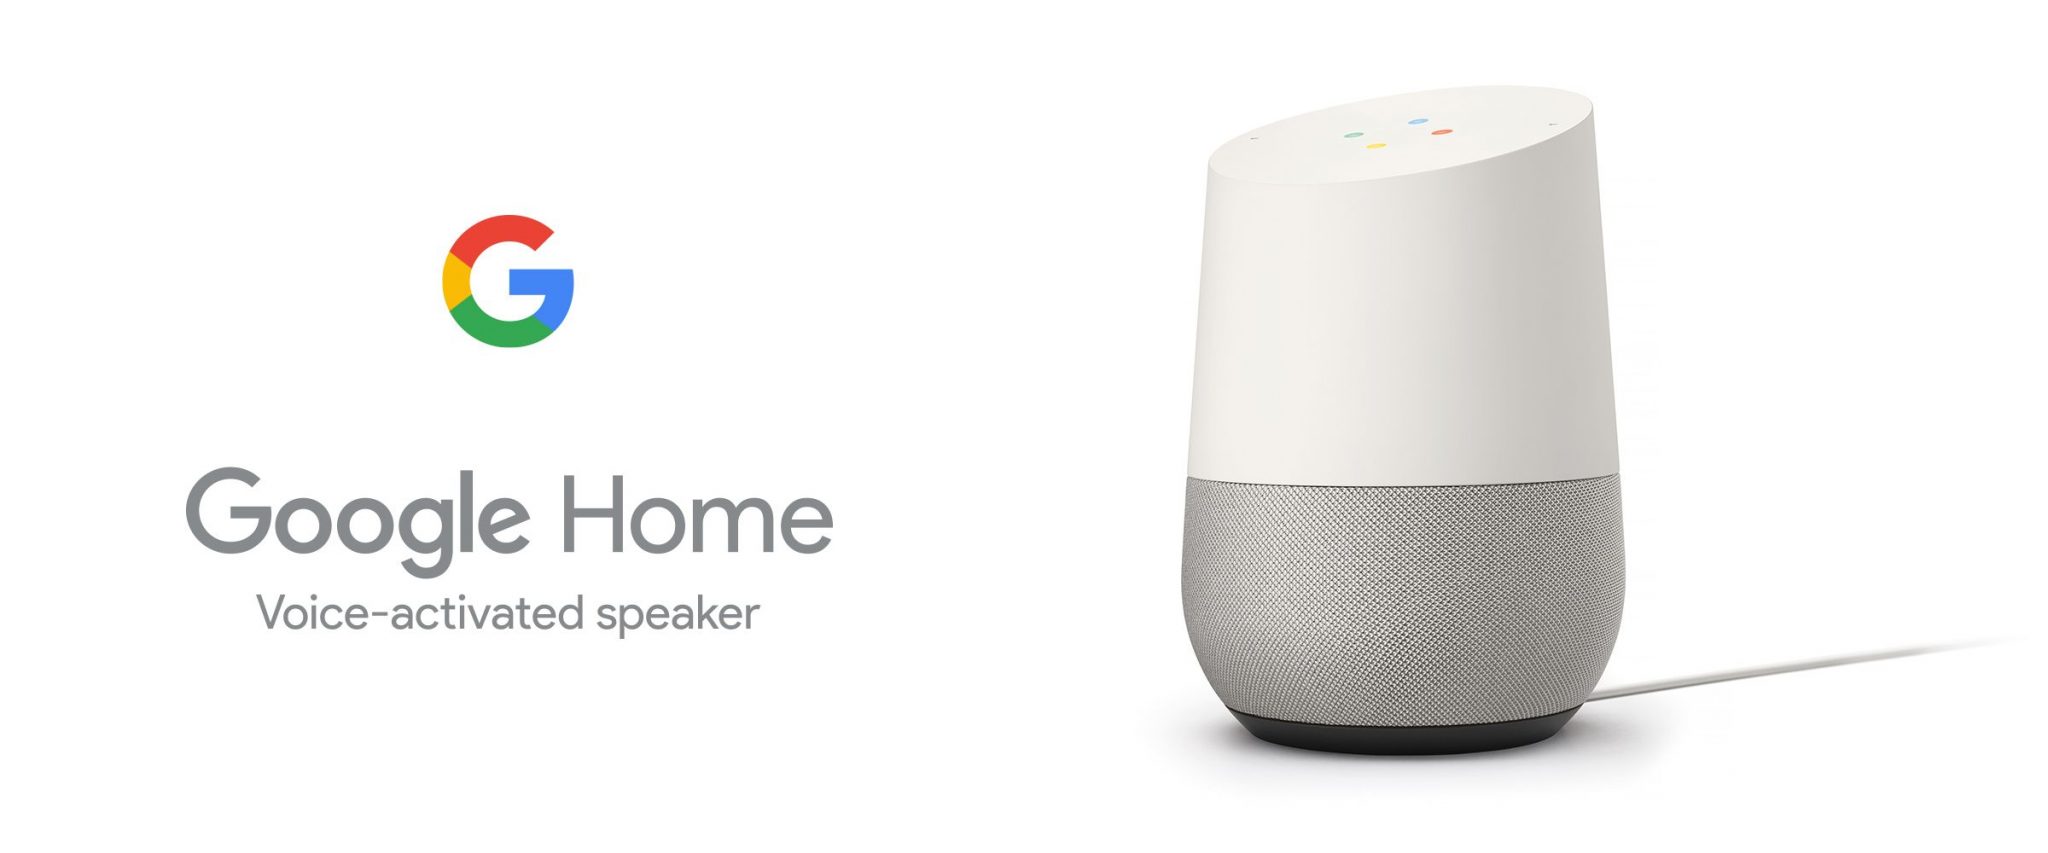 google home and google lens two new google products